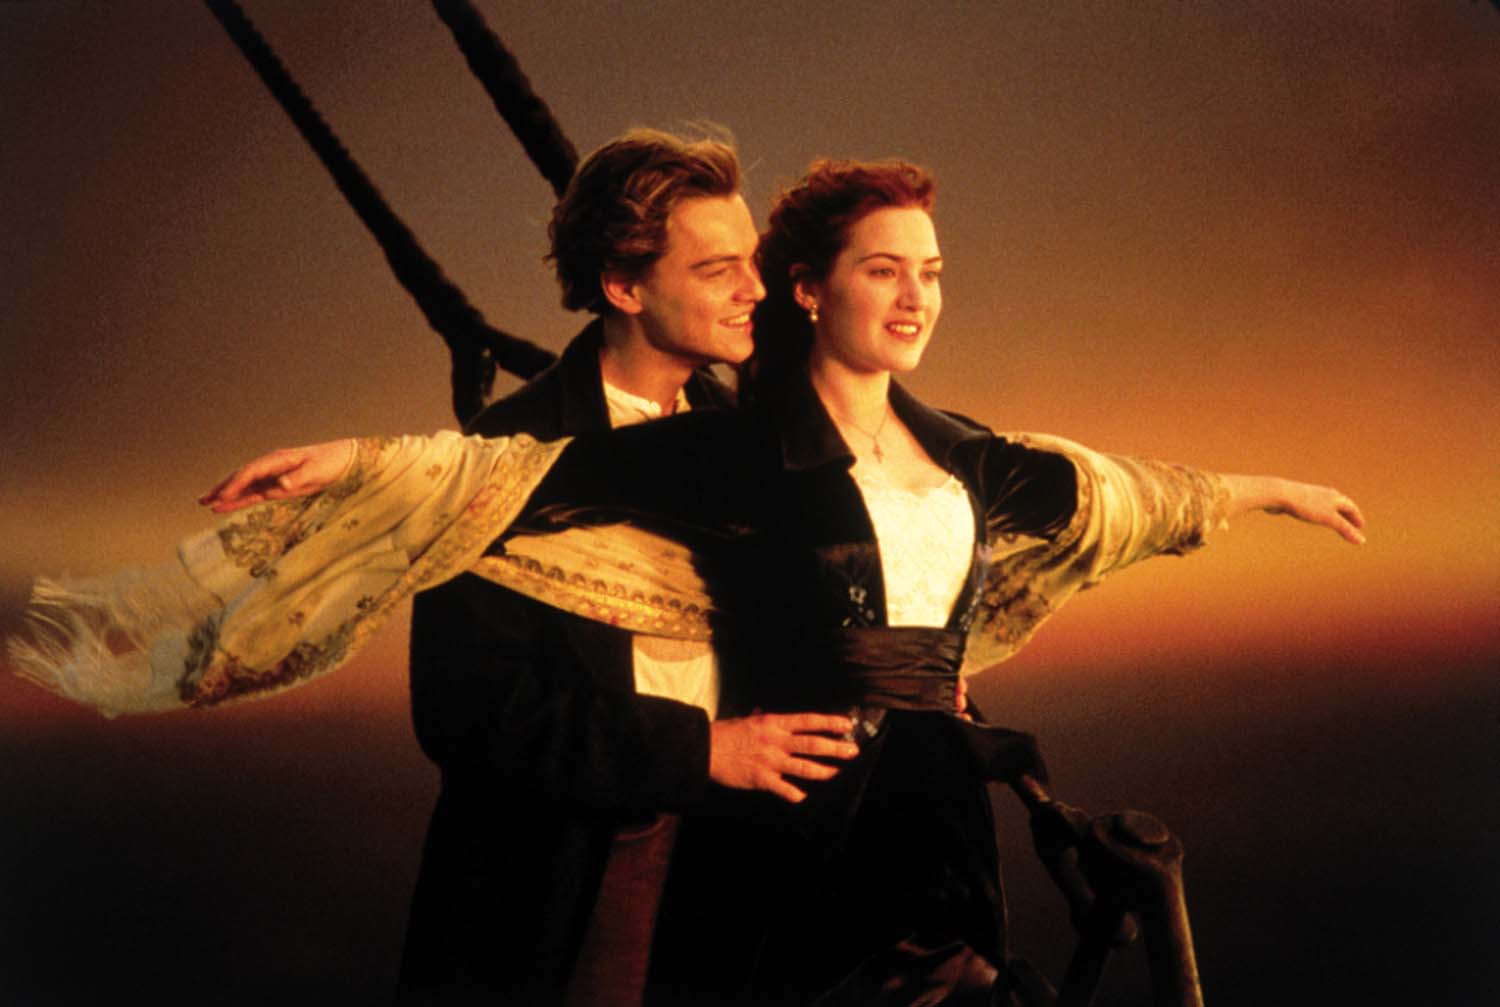 FILE - In this image released by Paramount Home Entertainment, Kate Winslet and Leonardo DiCaprio are shown in a scene from, "Titanic." Paramount Pictures and 20th Century Fox announced Thursday, May 19, 2011, that James Camerons Oscar-winning film will be rereleased in 3-D on April 6 next year. The rerelease will coincide with the 100th anniversary of the Titanic setting sail on April 10. (AP Photo/Paramount Pictures)